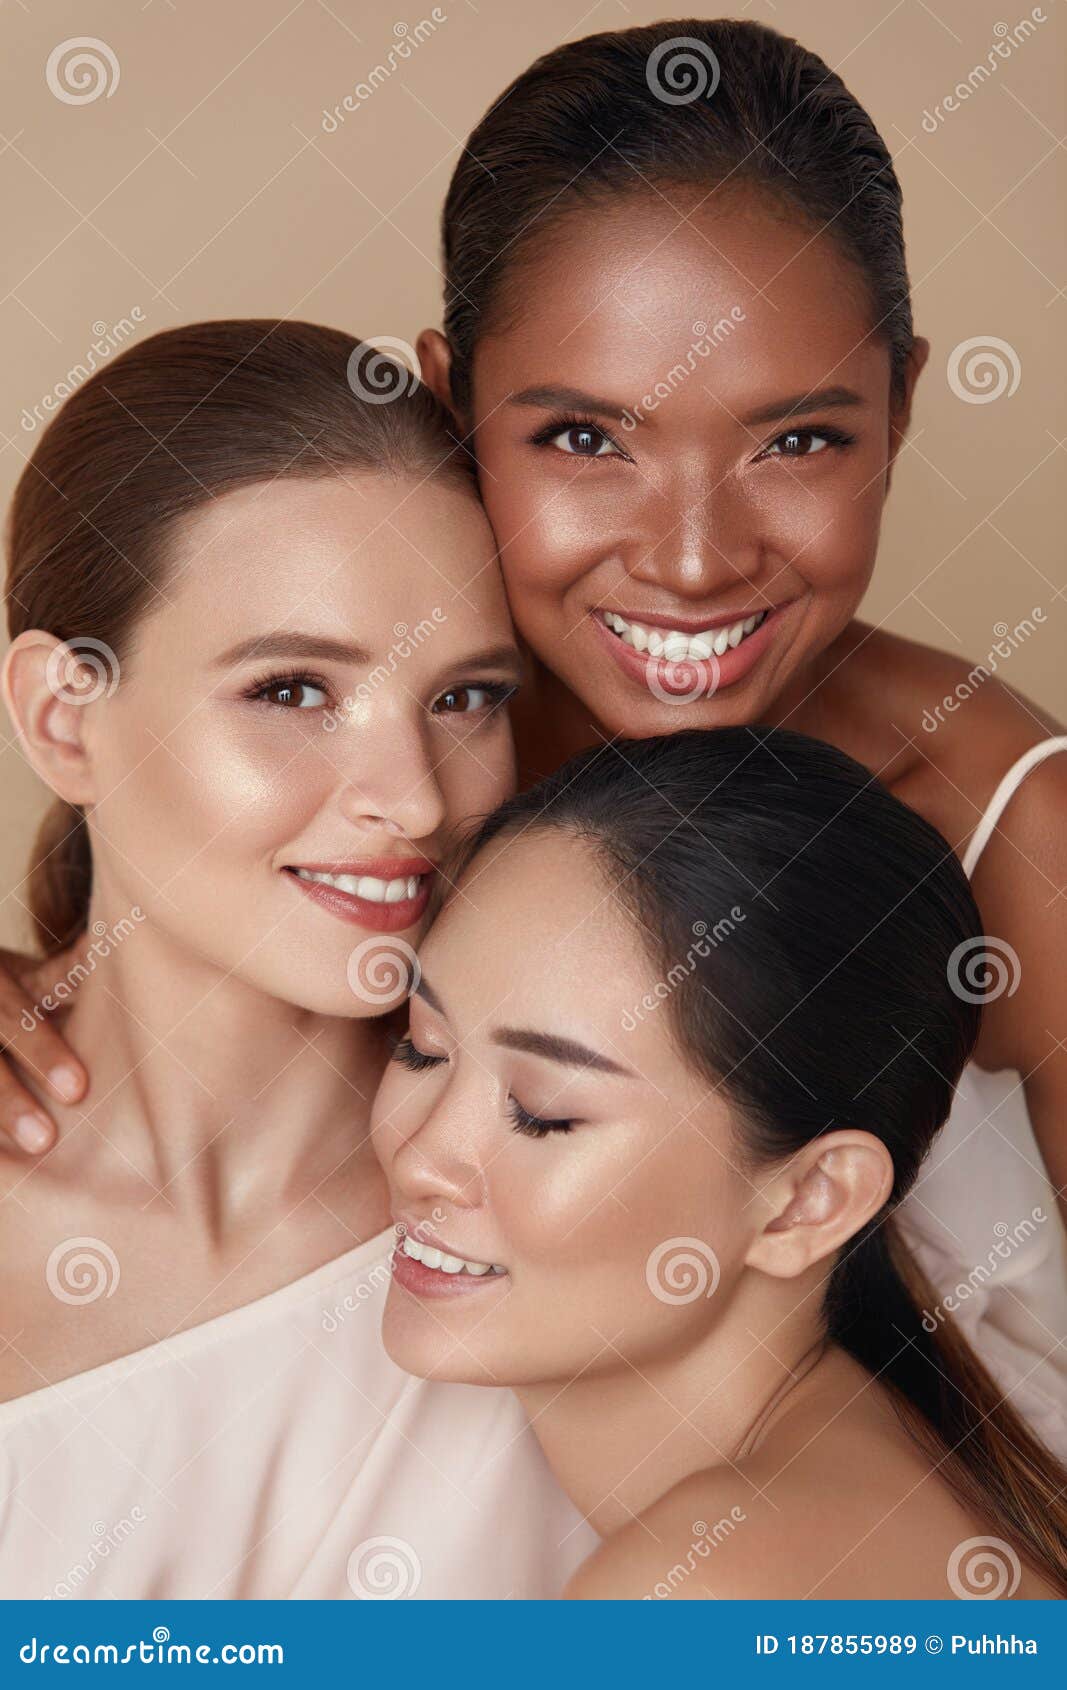 diversity. beauty portrait of women. multi-ethnic models with natural makeup and perfect skin against beige background.